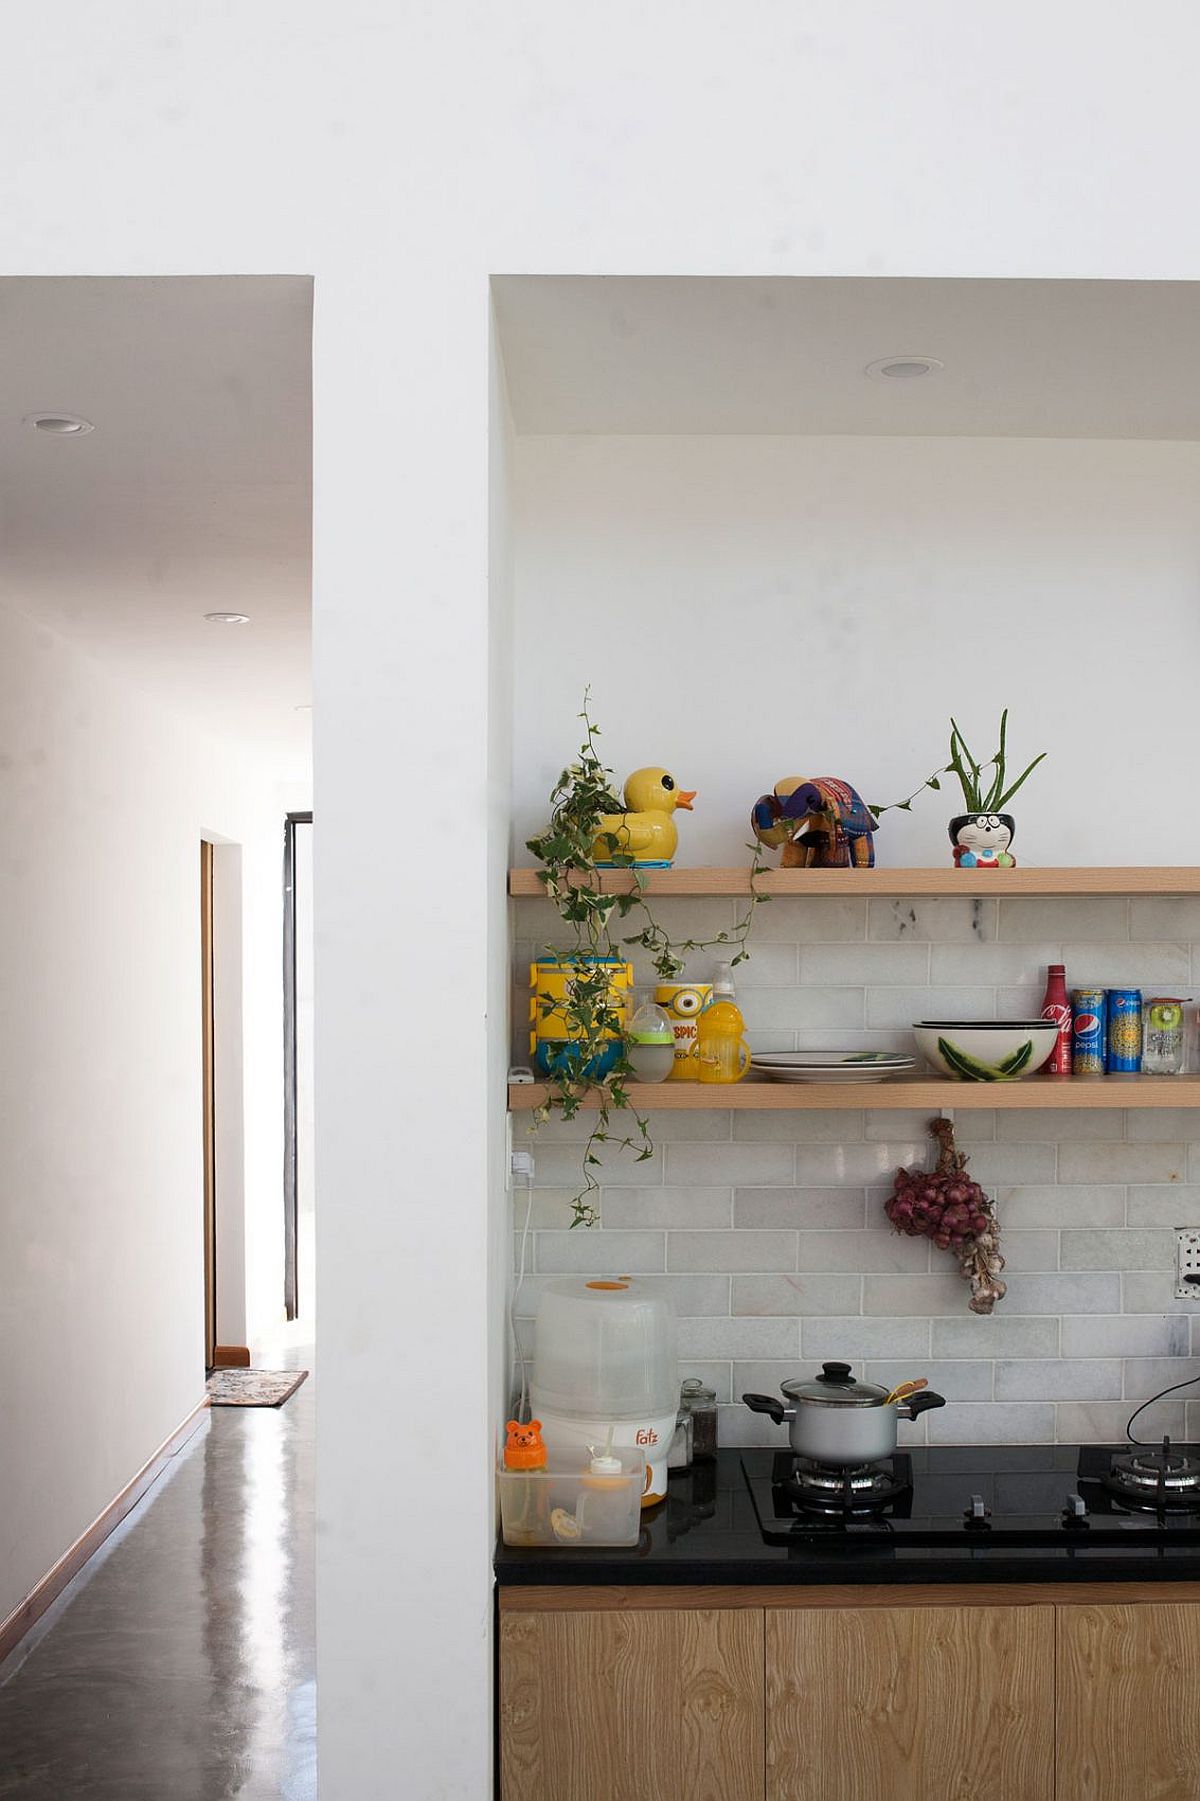 Open shelves above the kitchen counter at the stylish modern house in Vietnam